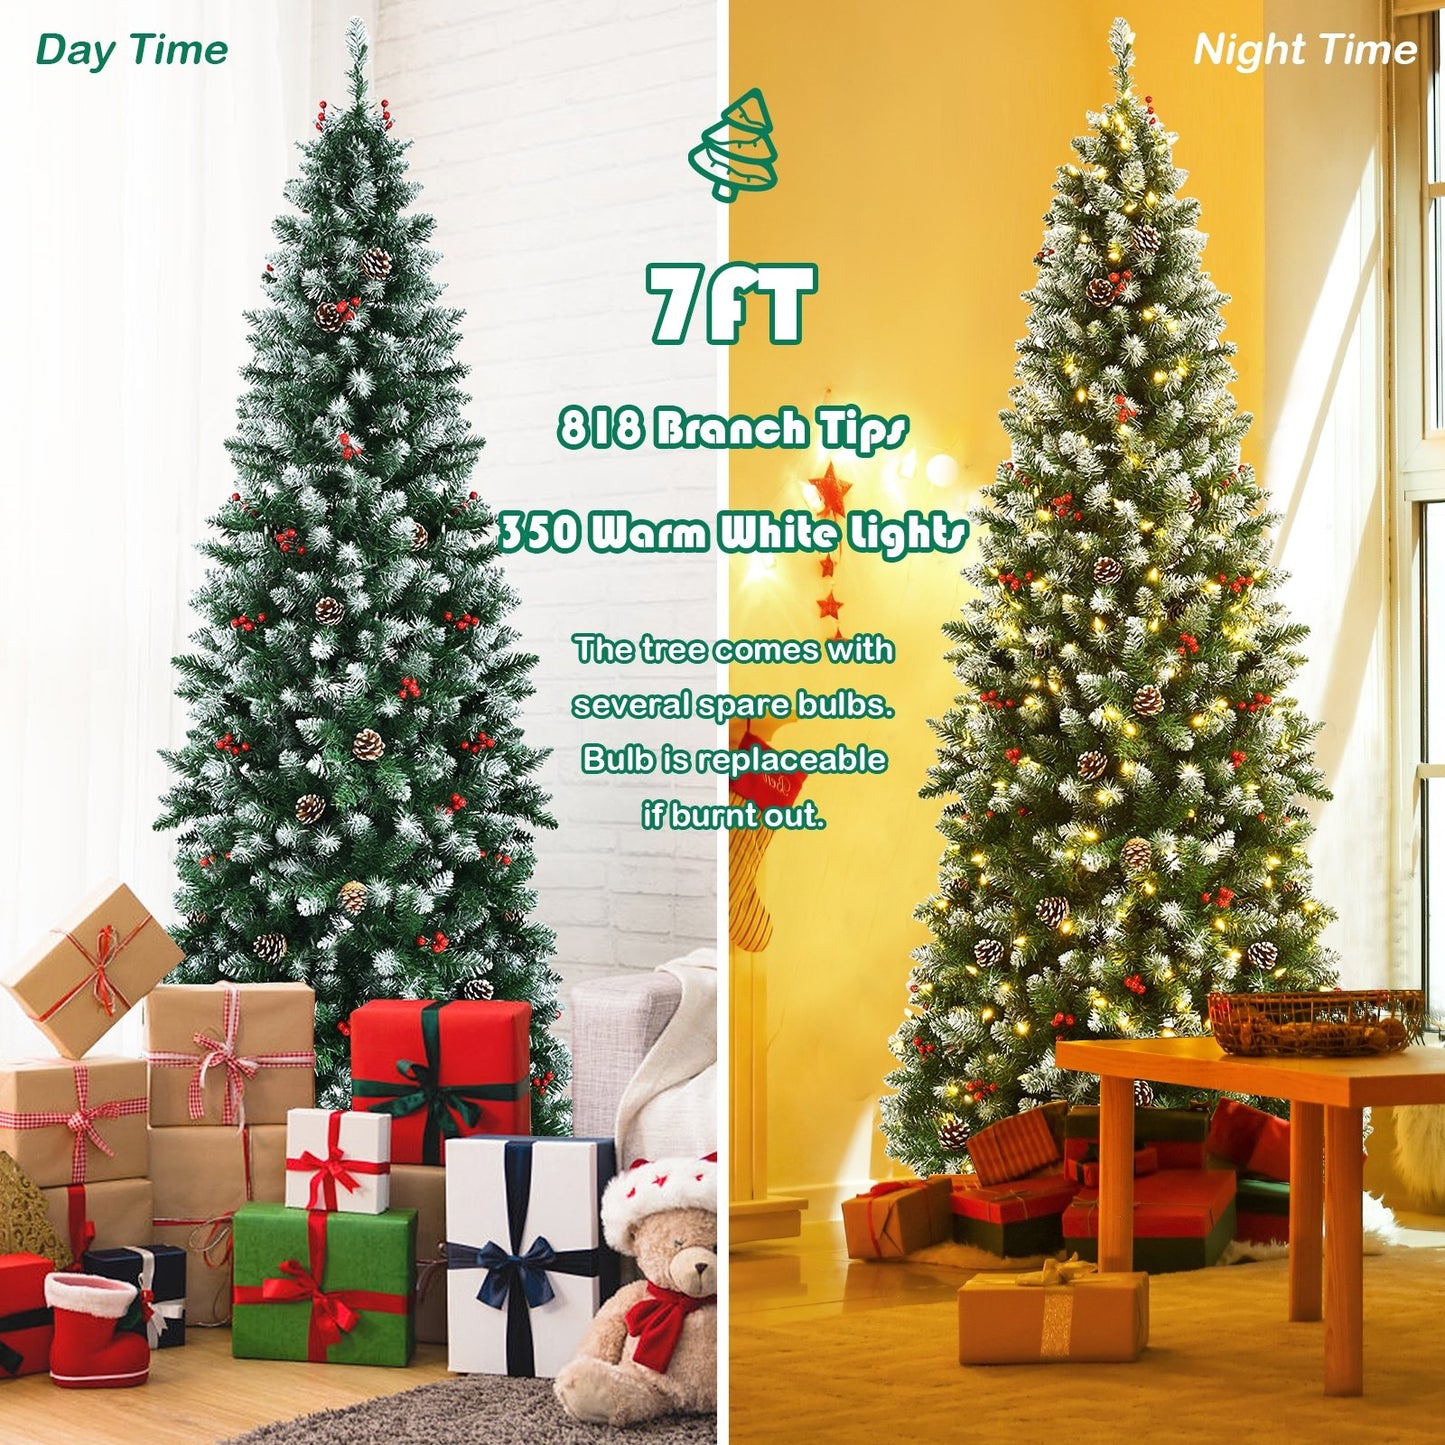 Pre-lit Artificial Pencil Christmas Tree with Pine Cones and Red Berries-7 ft, Green - Gallery Canada